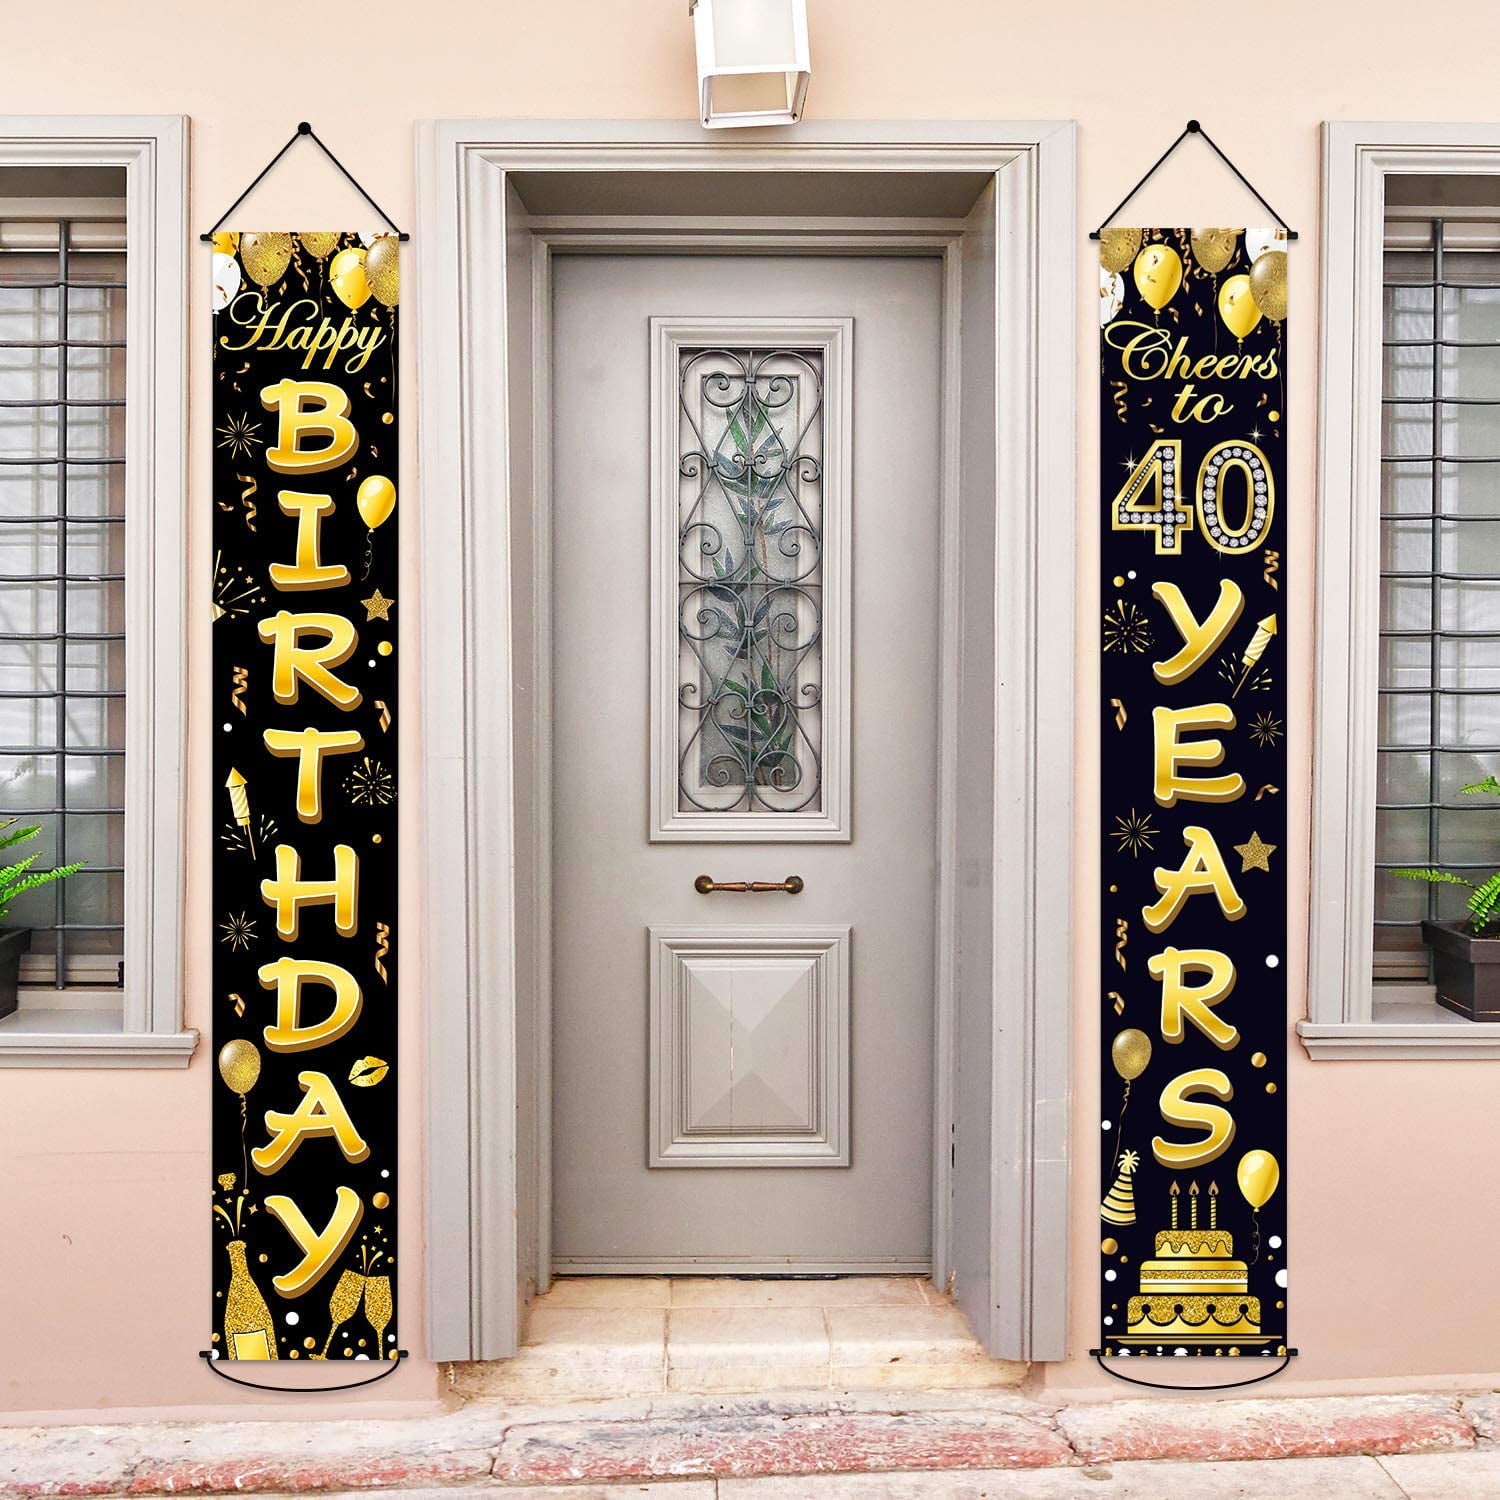 40th Birthday Party Banner Decorations Cheers to 40 Years Banner 40th Party Supplies Black Gold Welcome Porch Sign for Indoor Outdoor